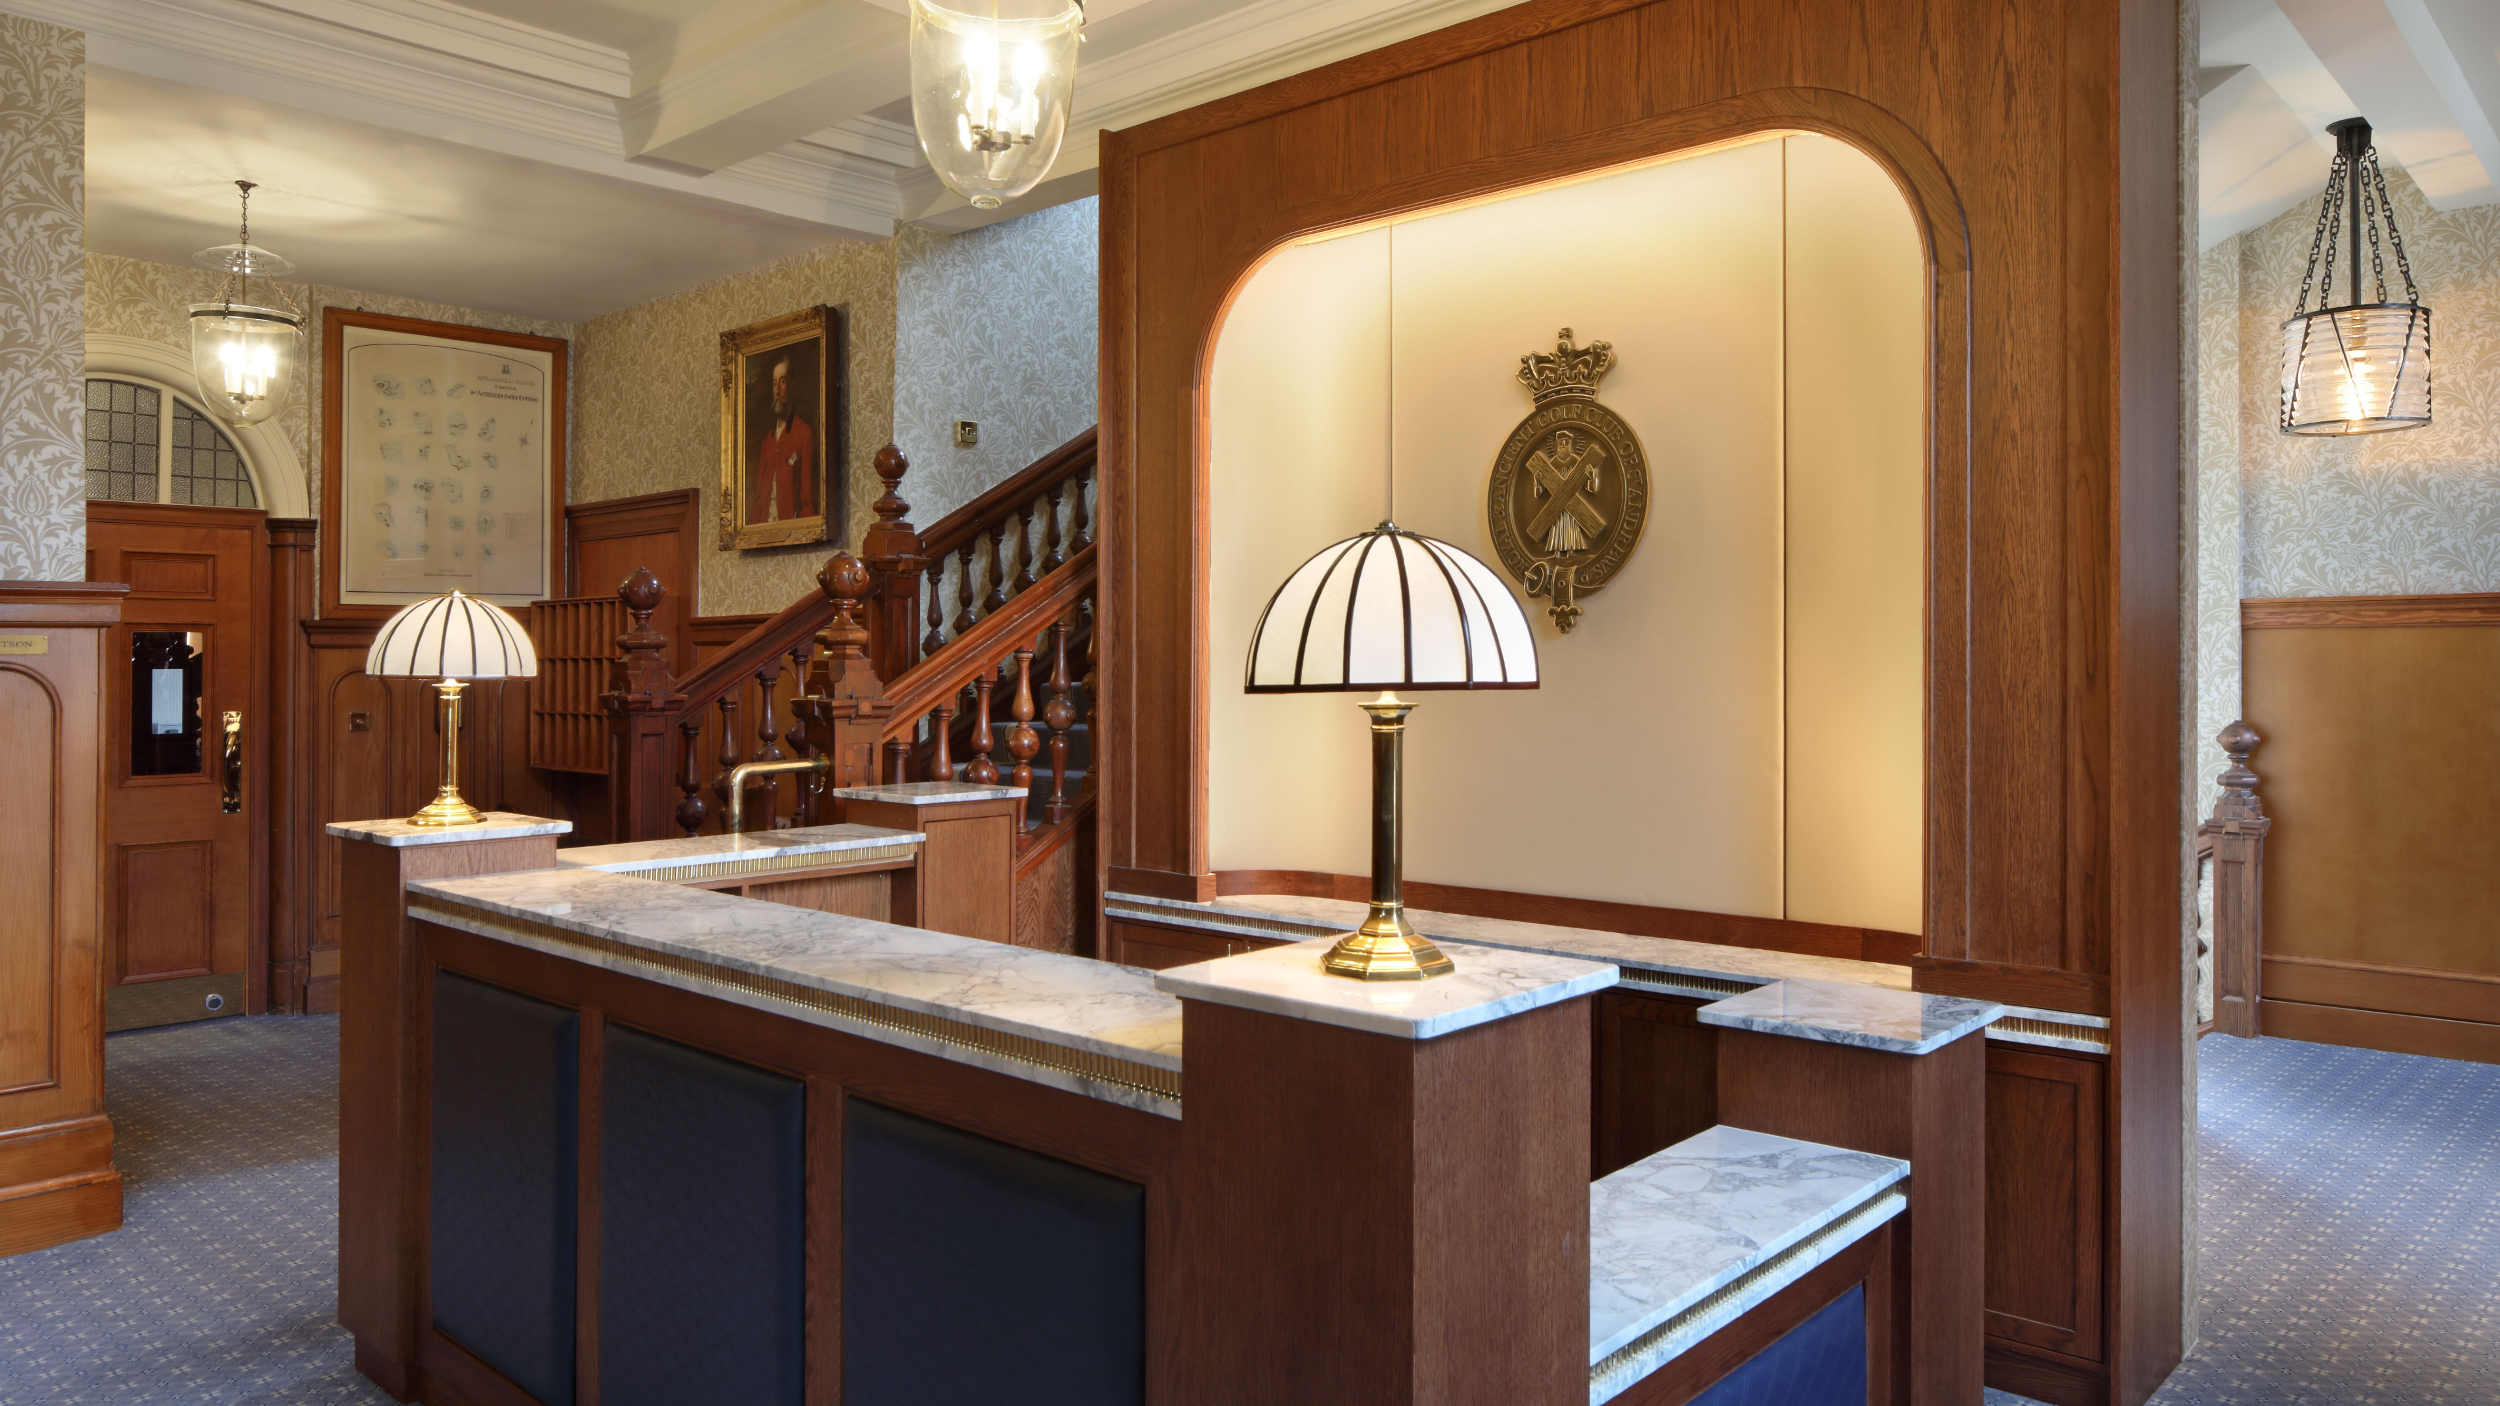 inside the r&a clubhouse (after its £11m renovation)... here's what it looks like